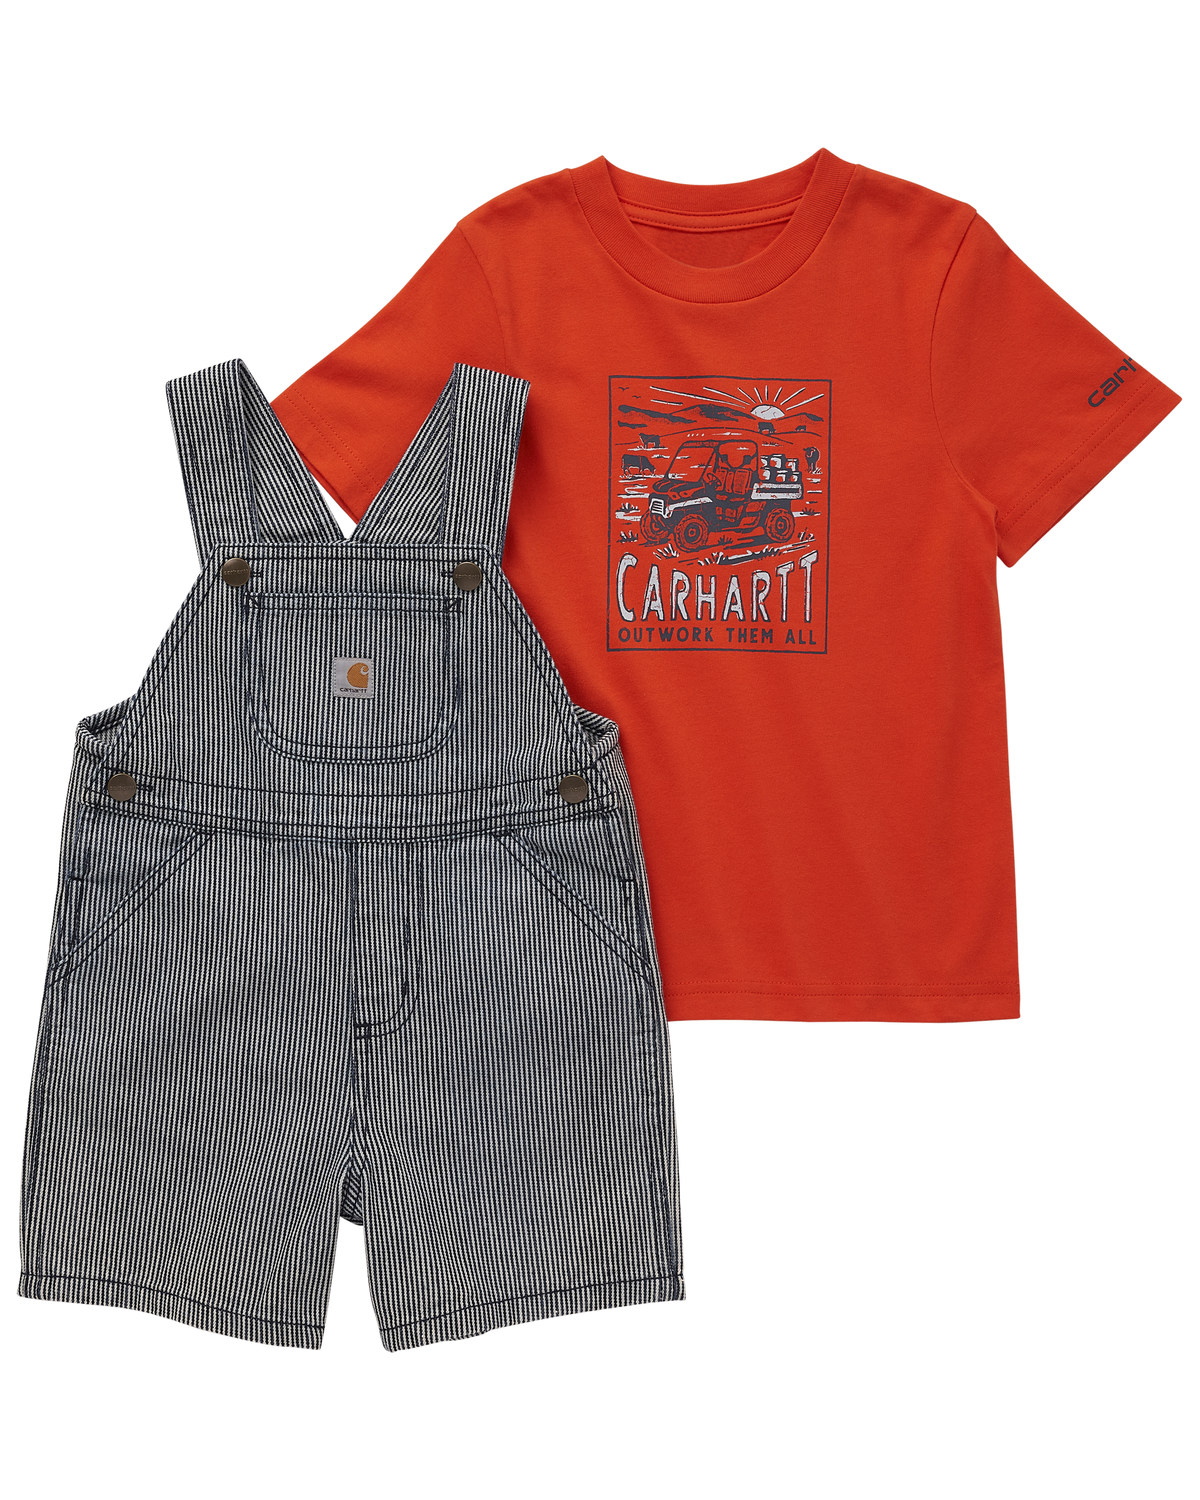 Carhartt Toddler Boys' Short Sleeve T-Shirt and Striped Overall Set